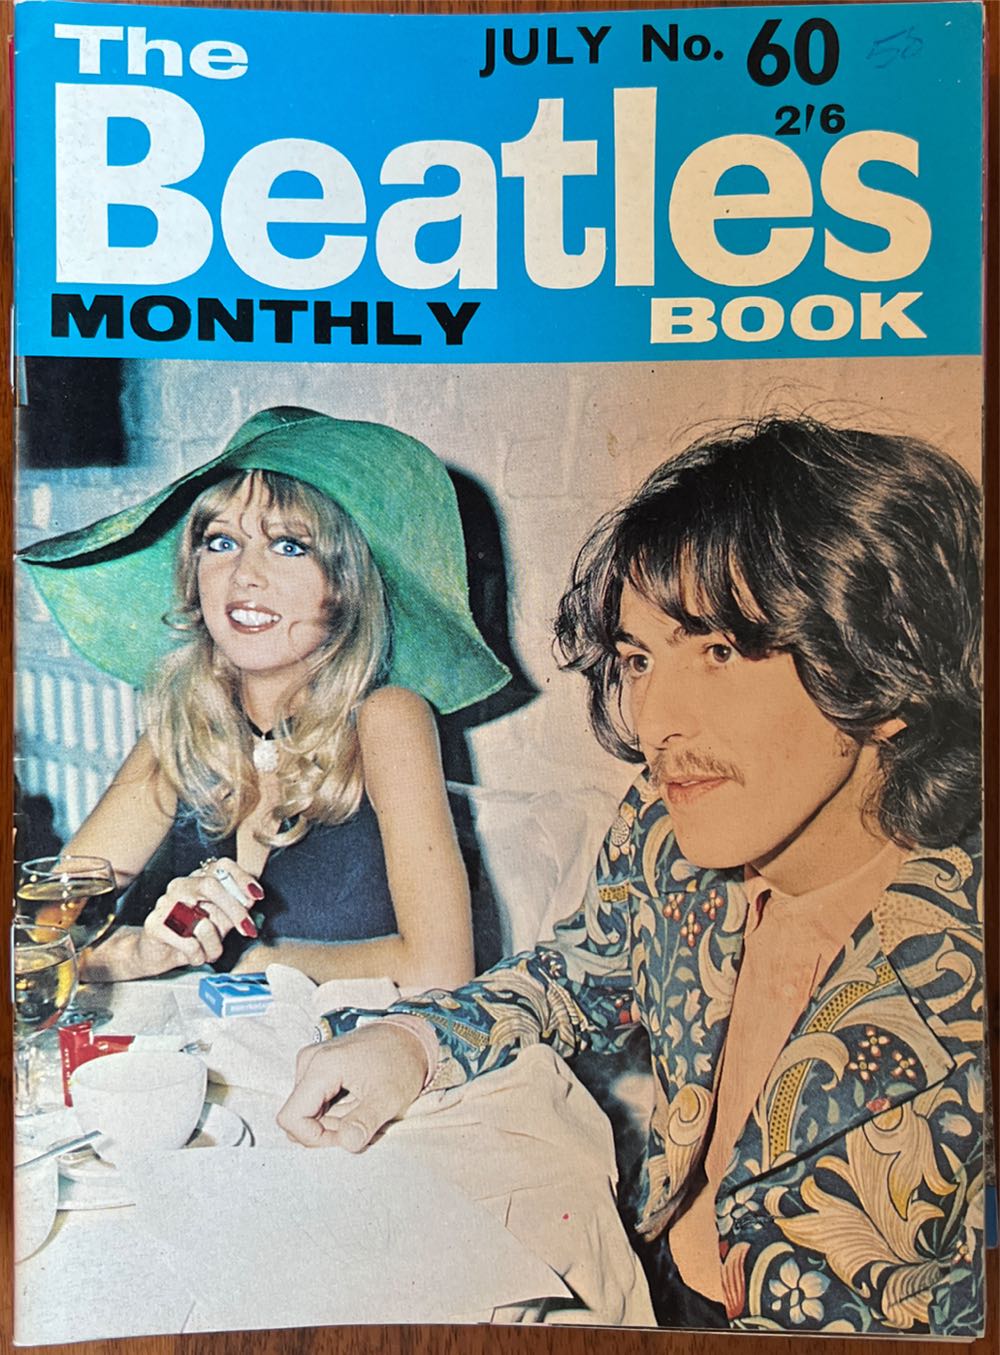 The Beatles Book Monthly No. 60  (July) magazine collectible - Main Image 1